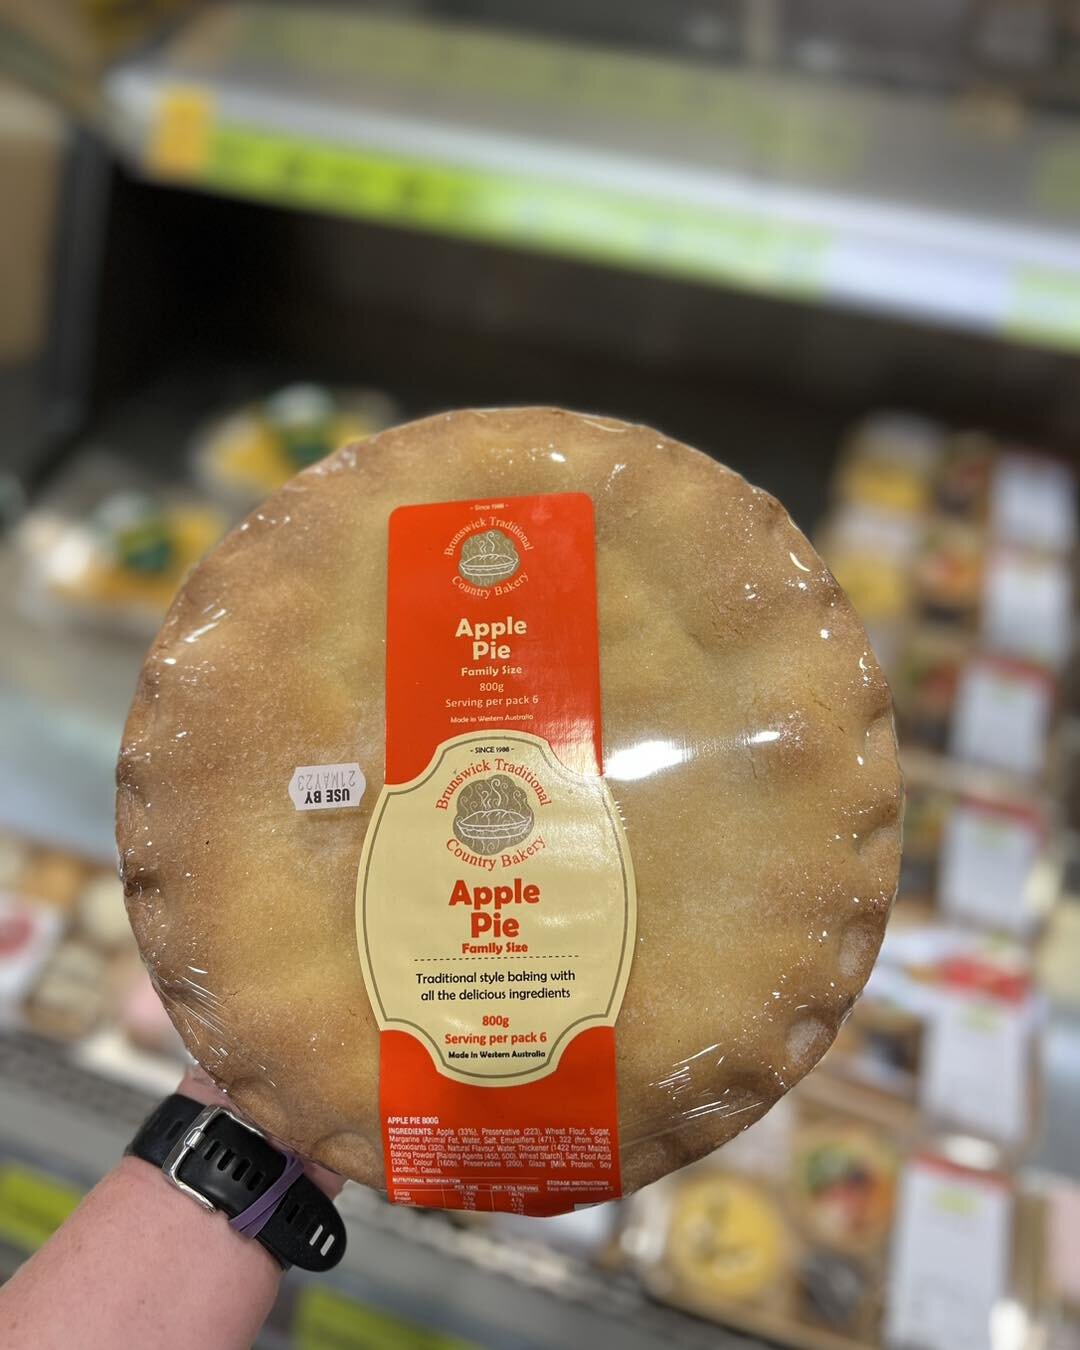 Have you tried the Brunswick Bakery Apple Pie? These are perfect to serve for an easy dessert when entertaining this weekend. 

#southbunburymarketplace #sbmarketplace #yourlocalmarketplace #buywesteatbest #supportlocal #freshandlocal #themarketplace